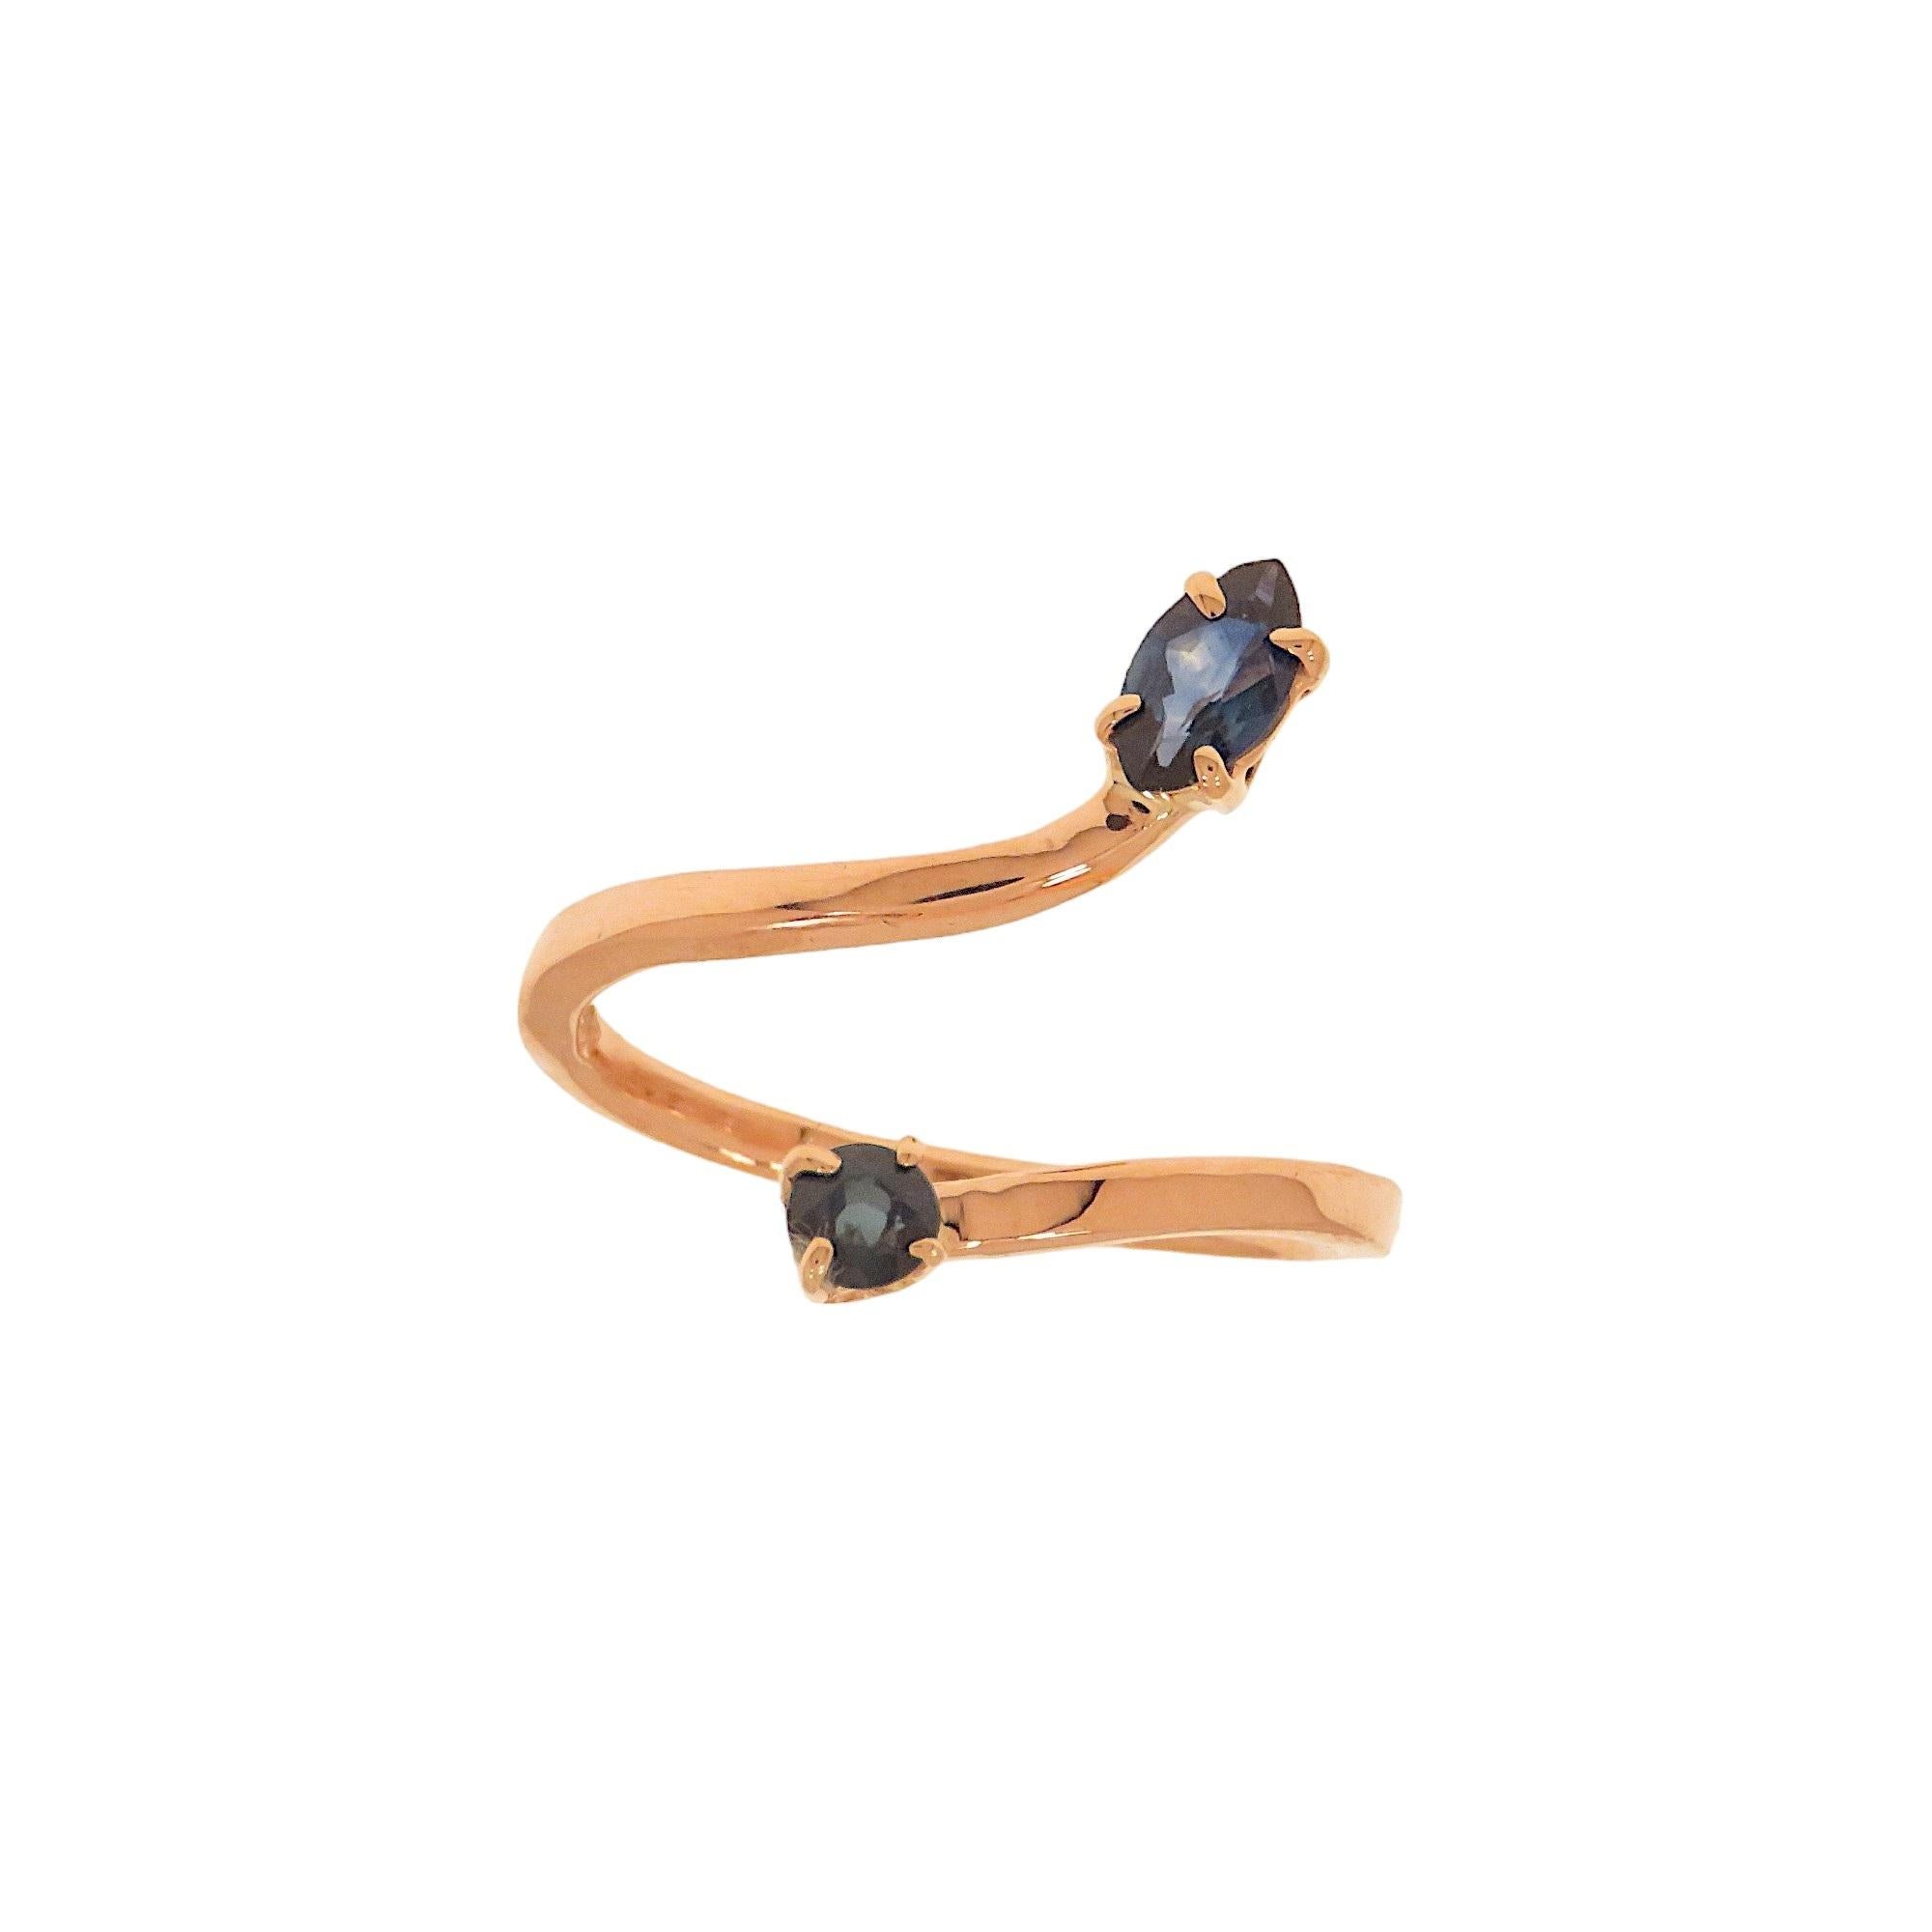 Elegant snake ring with 2 blue sapphires, one navette-cut and one brilliant-cut, mounted on 9k rose gold jaw set. The ring is also ideal for an engagement gift. The jewelry was made entirely by hand in our workshop in Milan. The two blue sapphires